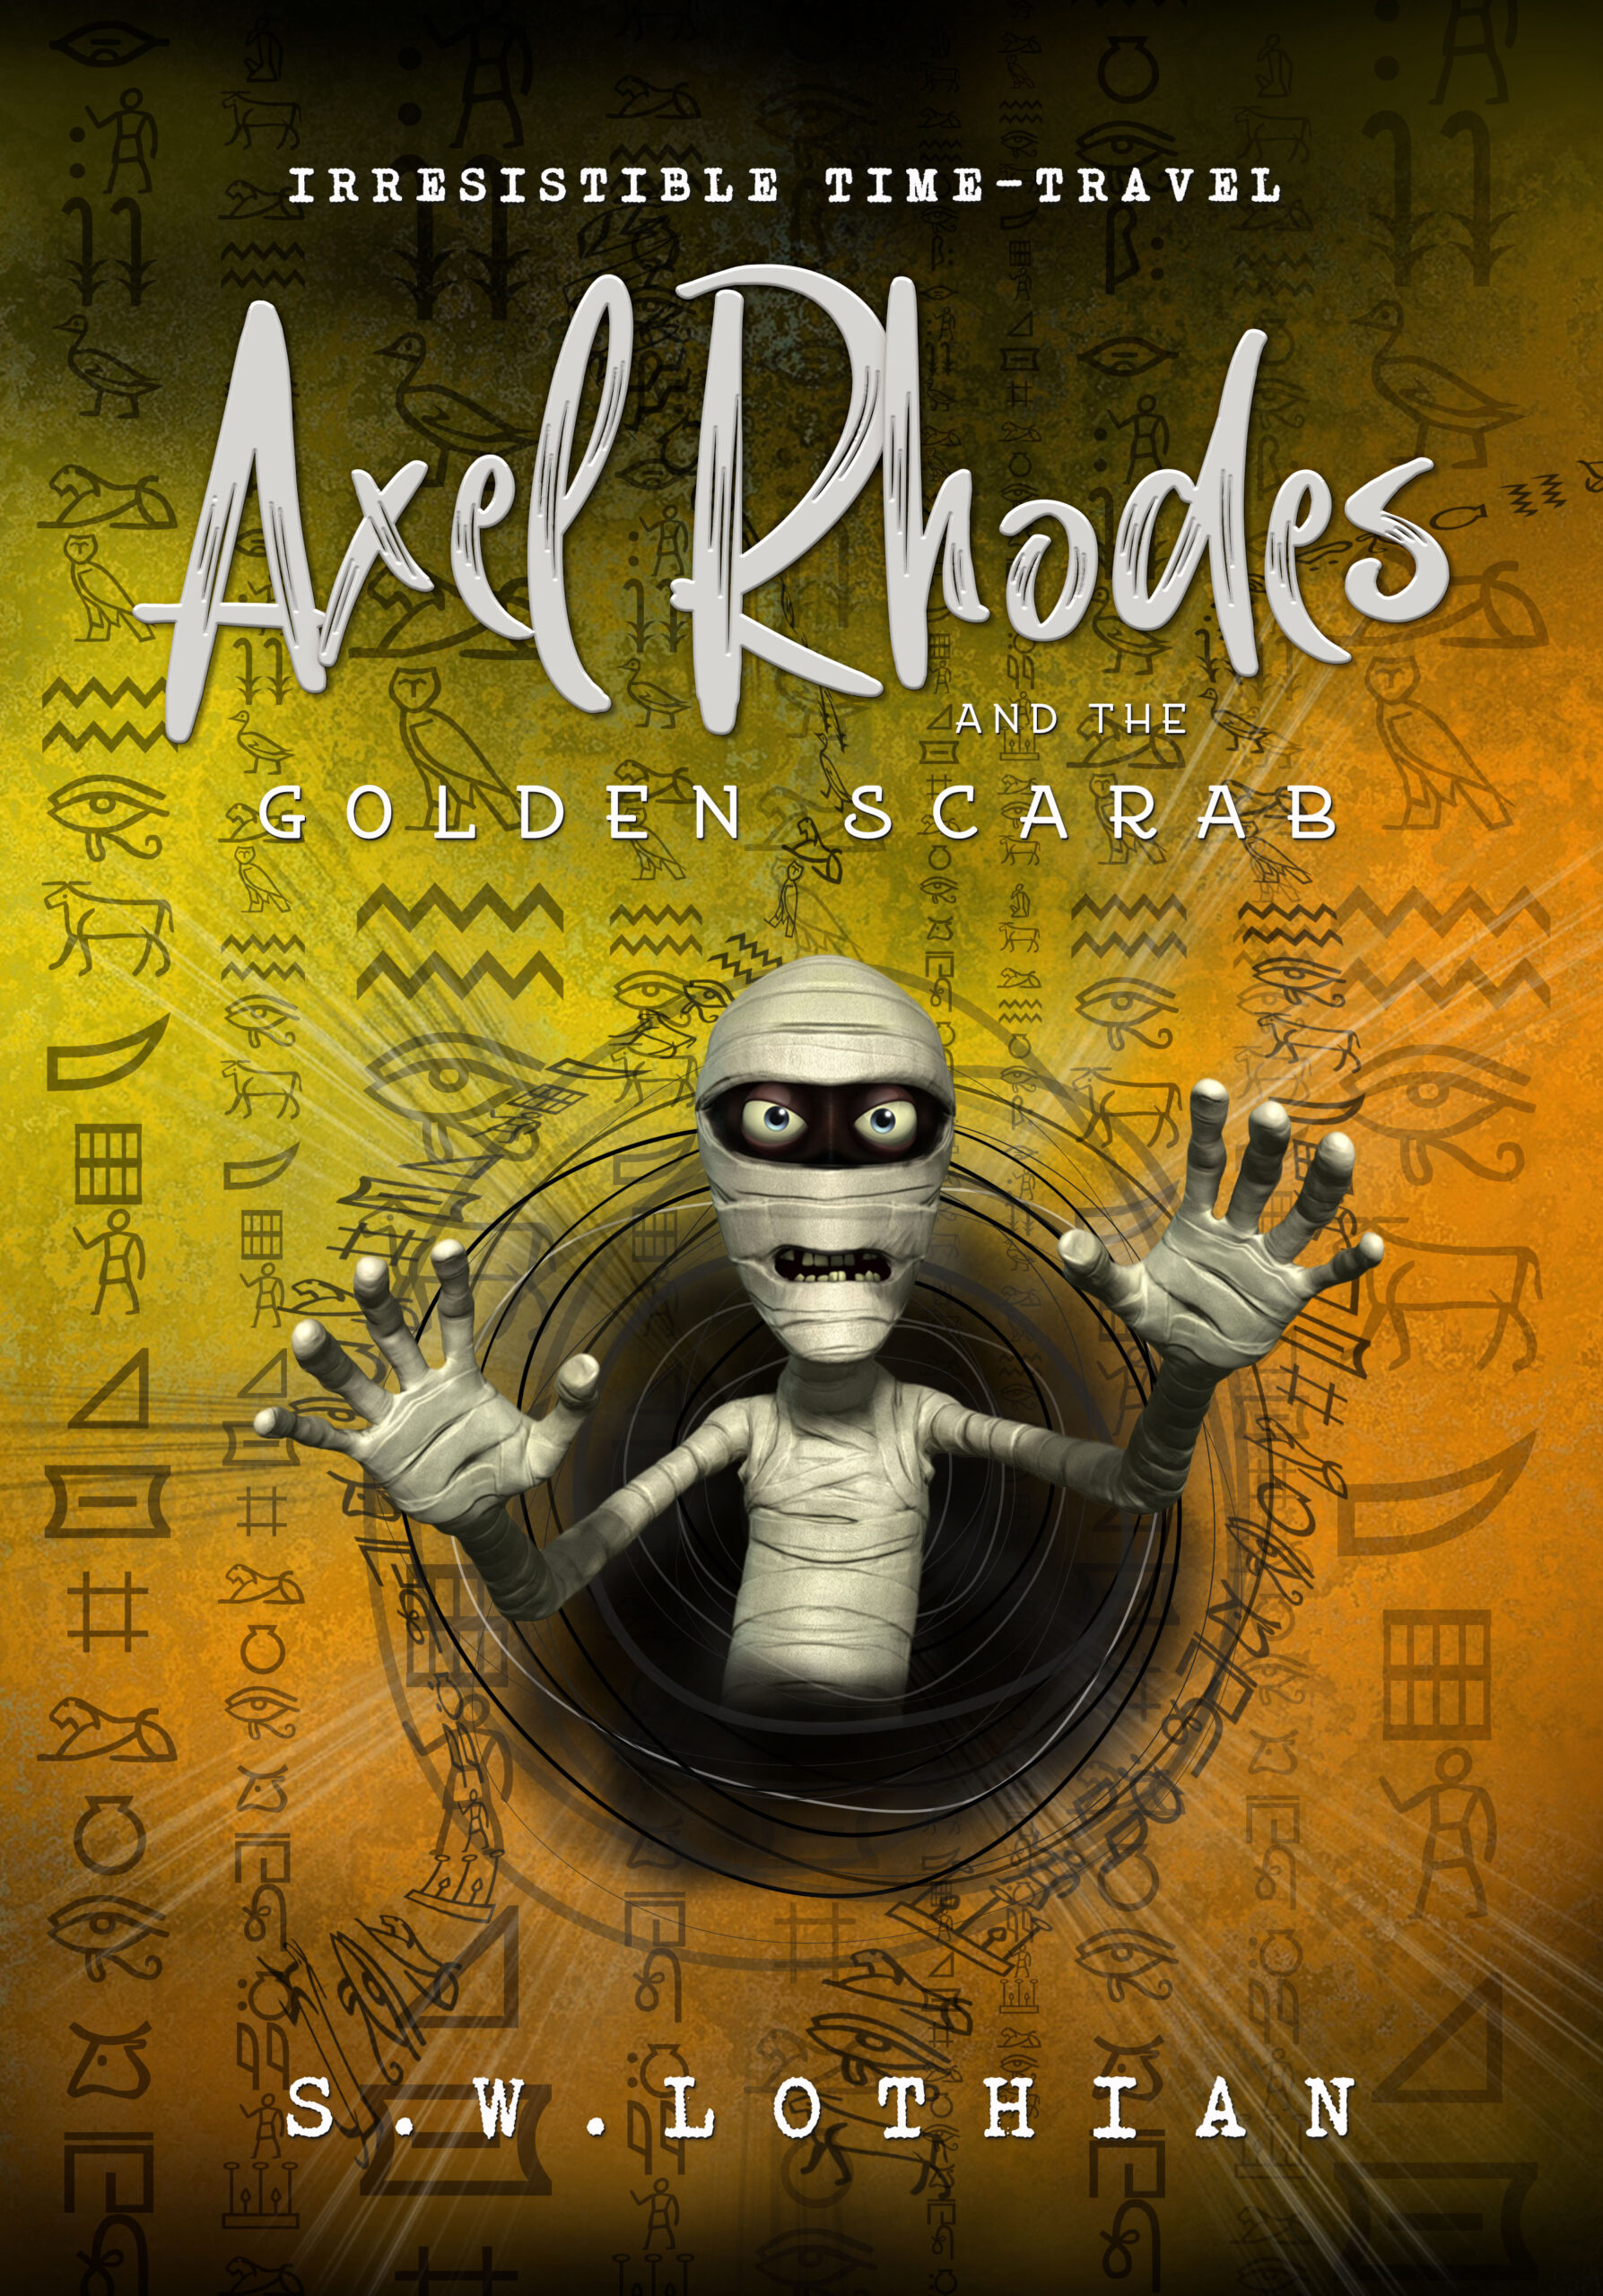 FREE: Axel Rhodes and the Golden Scarab by S.W. Lothian